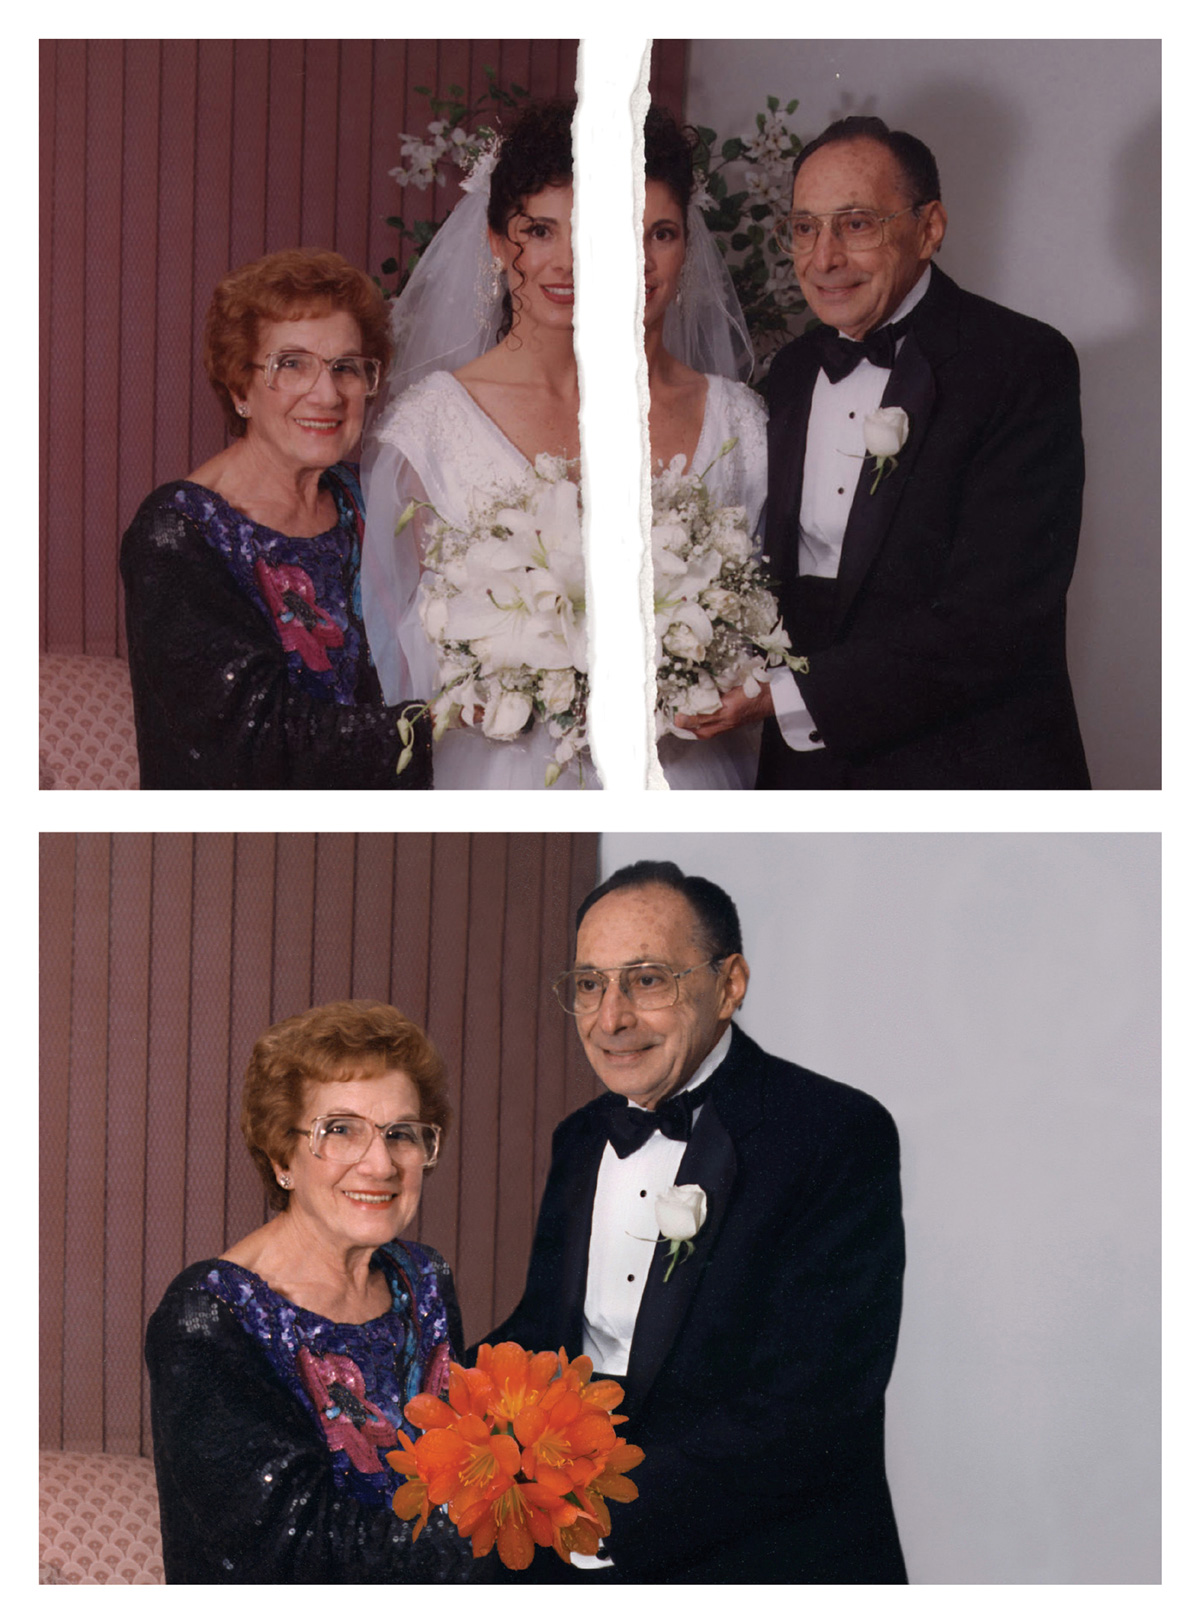 Two photographs: One depicting a bride surrounded by an older man and woman is torn in half, the other shows the man and woman without the bride between them.